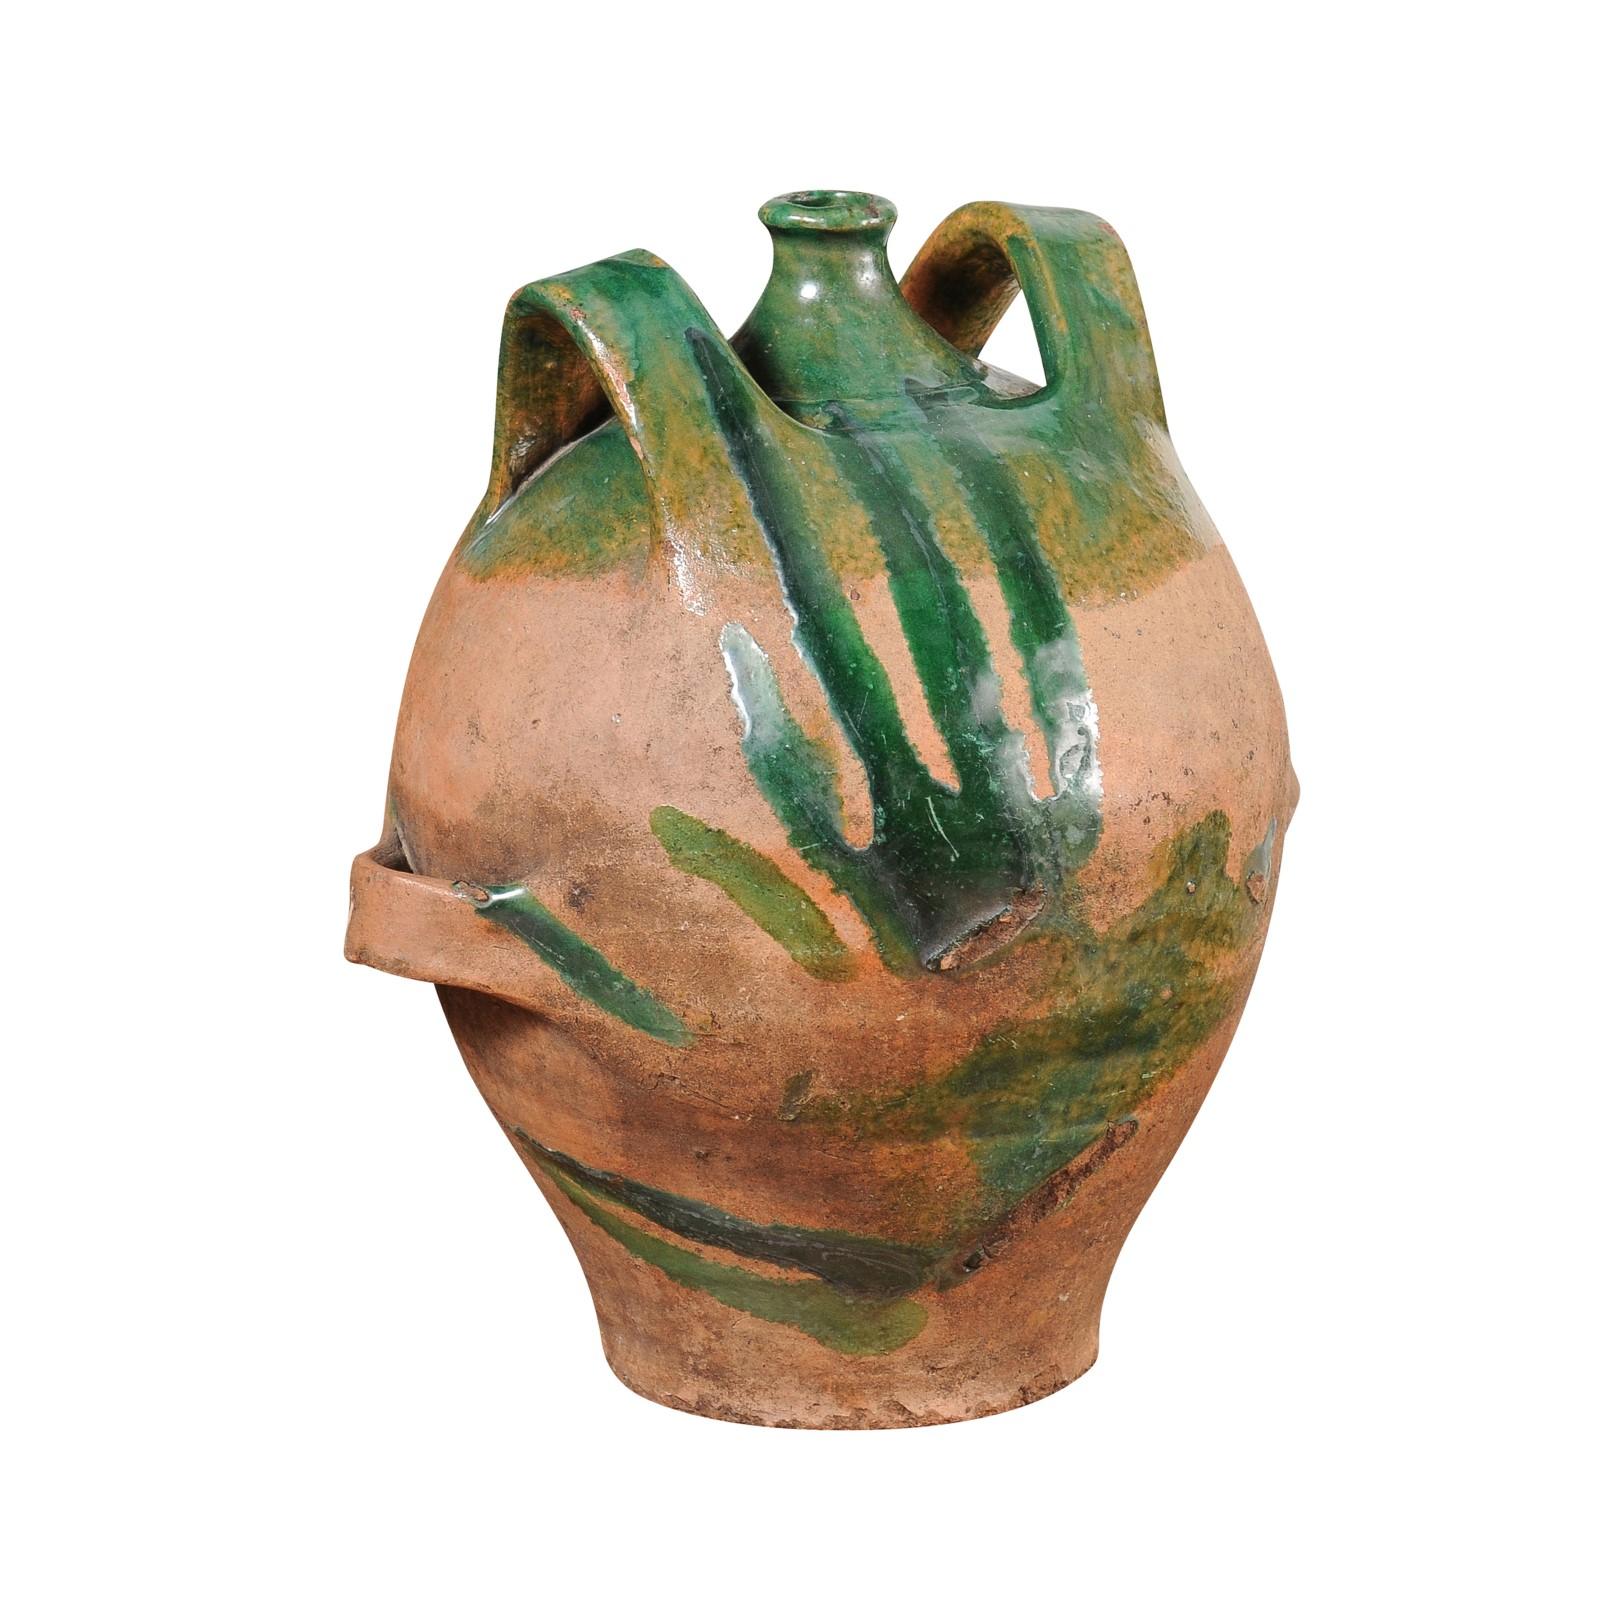 A French Provincial pottery jug from the 19th century with green glaze, dripping and lateral handles flanking the central spout. This captivating French Provincial pottery jug, crafted with meticulous care in the 19th century, is a splendid